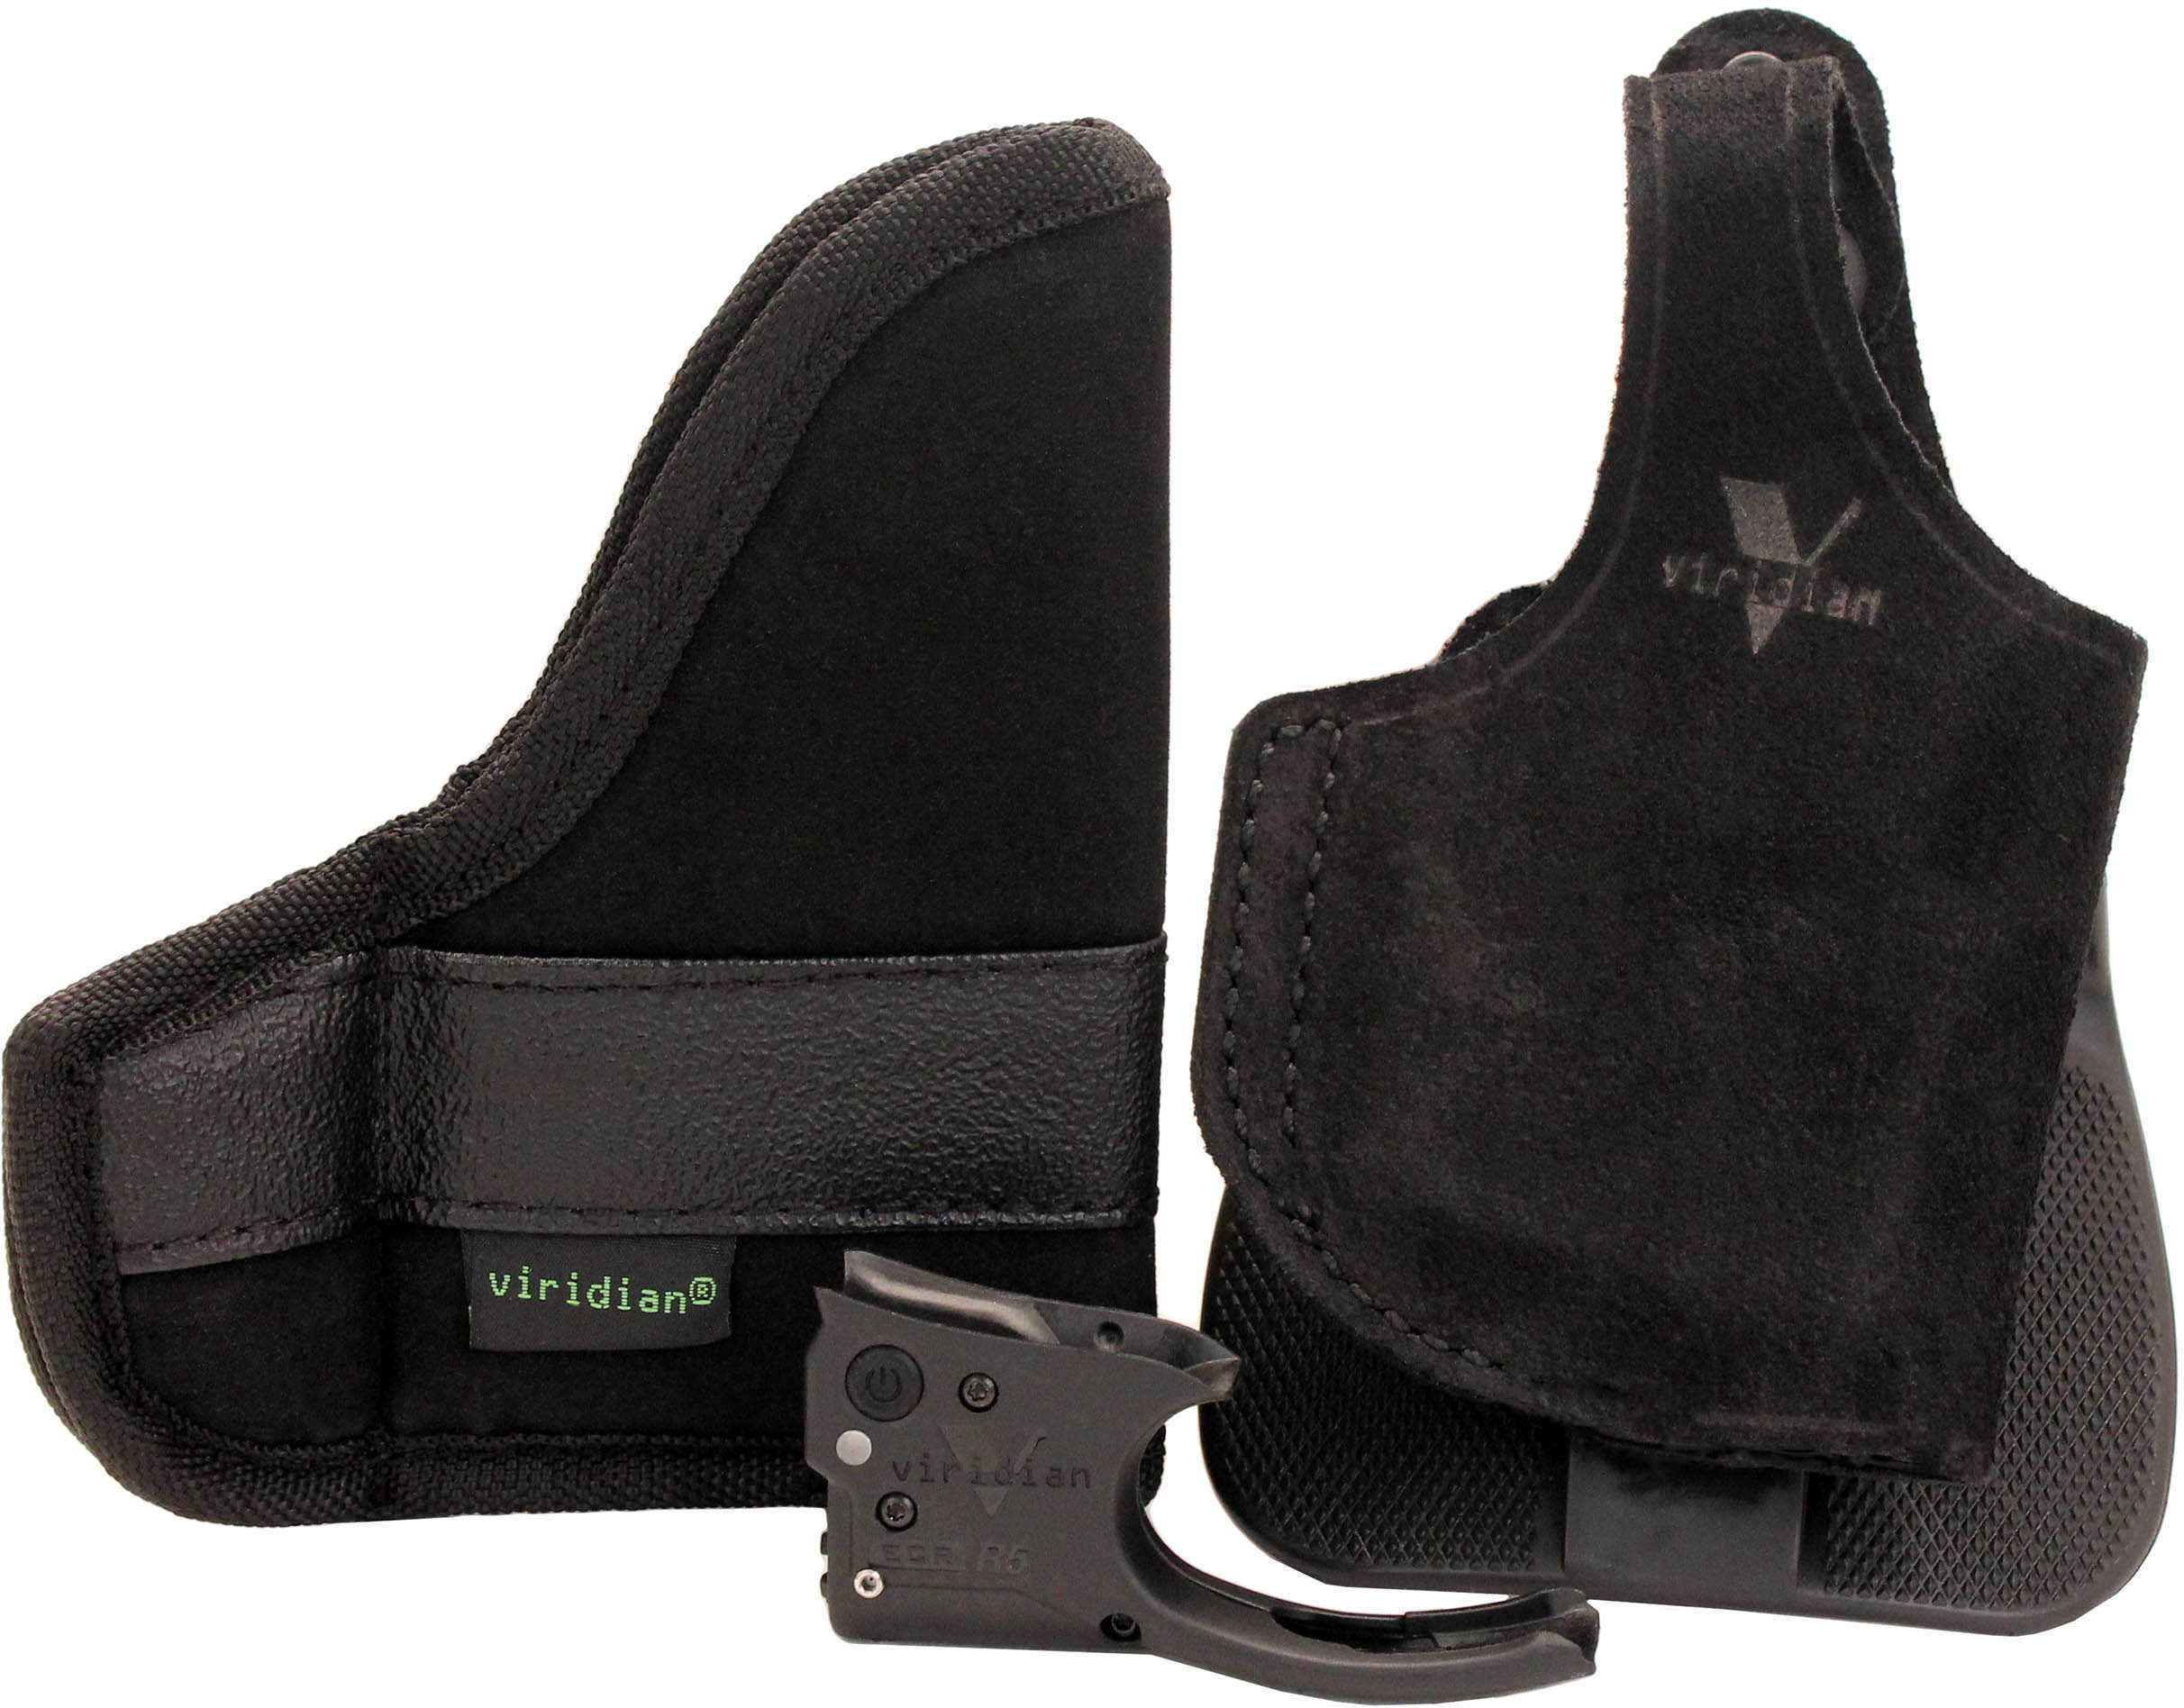 Viridian Weapon Technologies Reactor 5 Green Laser With Galco Paddle ECR Holster For Ruger LCP Md: R5-LCP-GPL